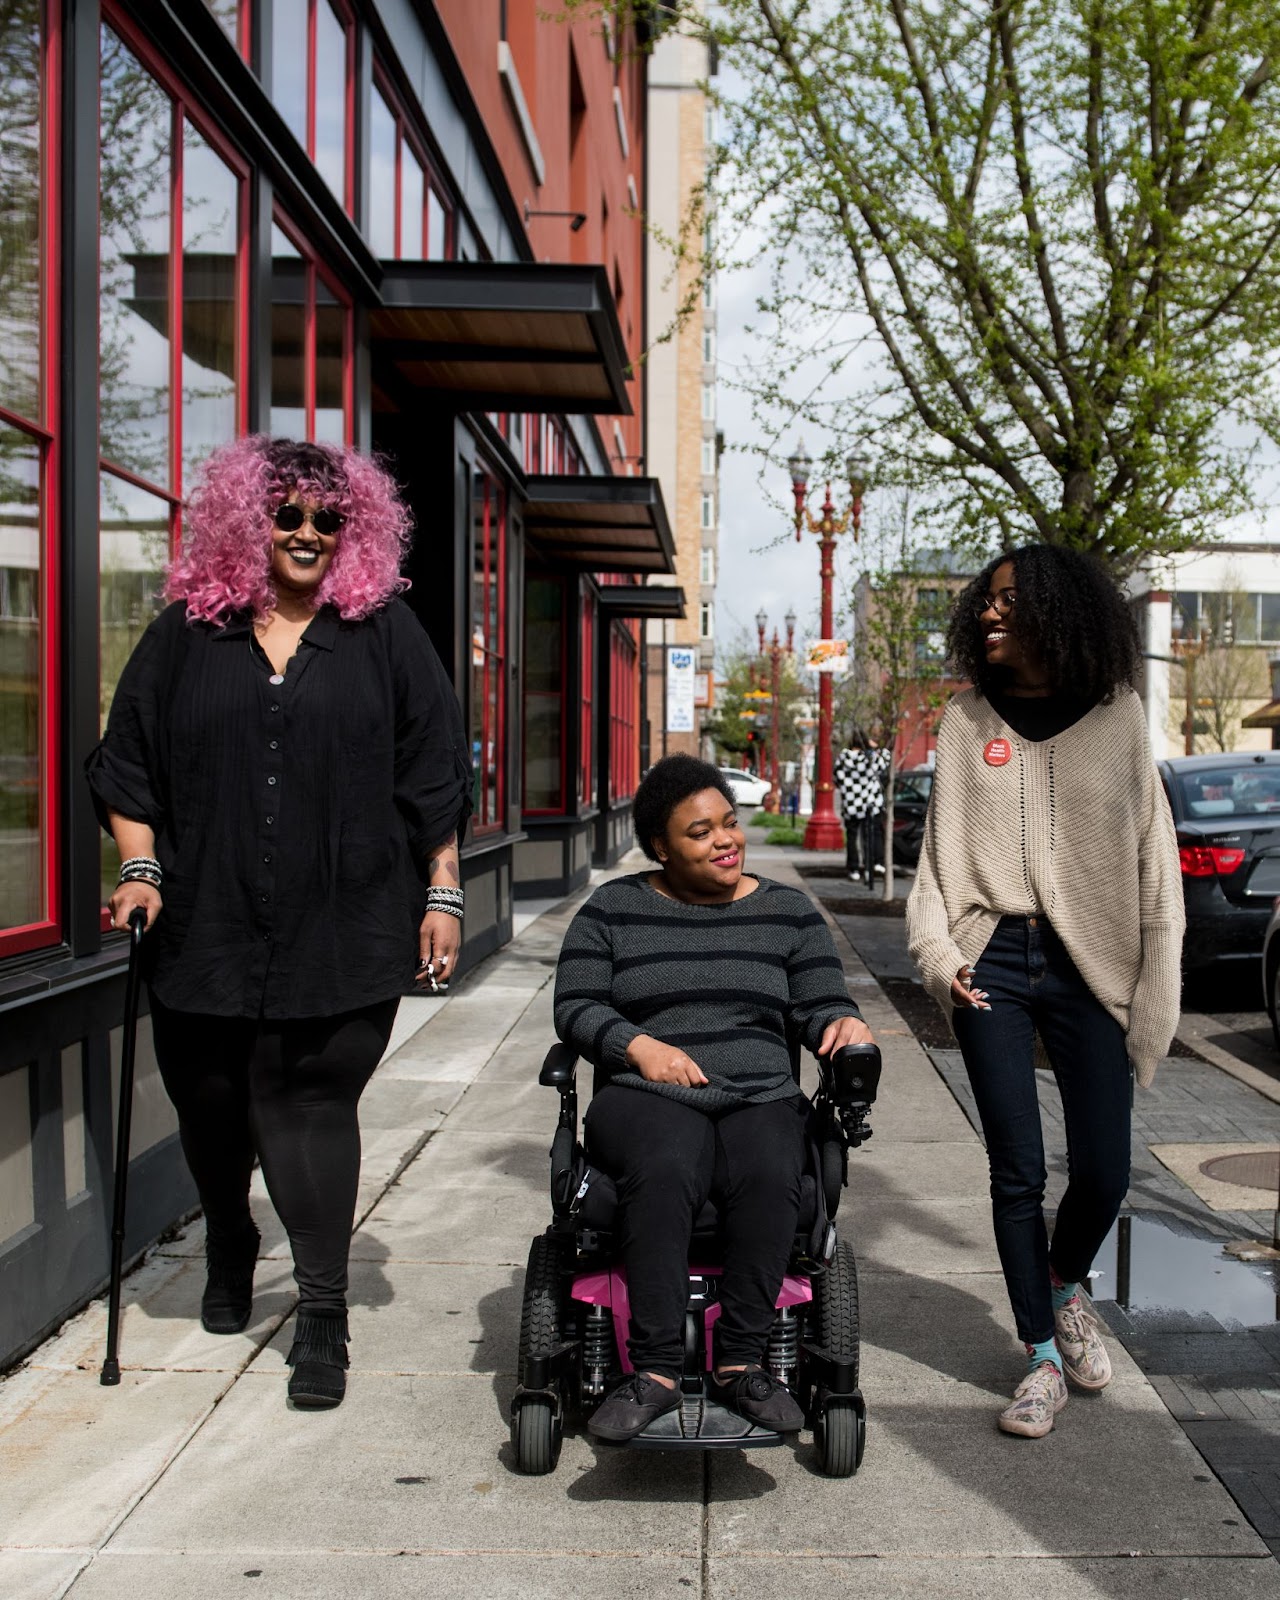 Three people on a sidewalk smiling at one another; one uses a cane, and one is riding in a wheelchair